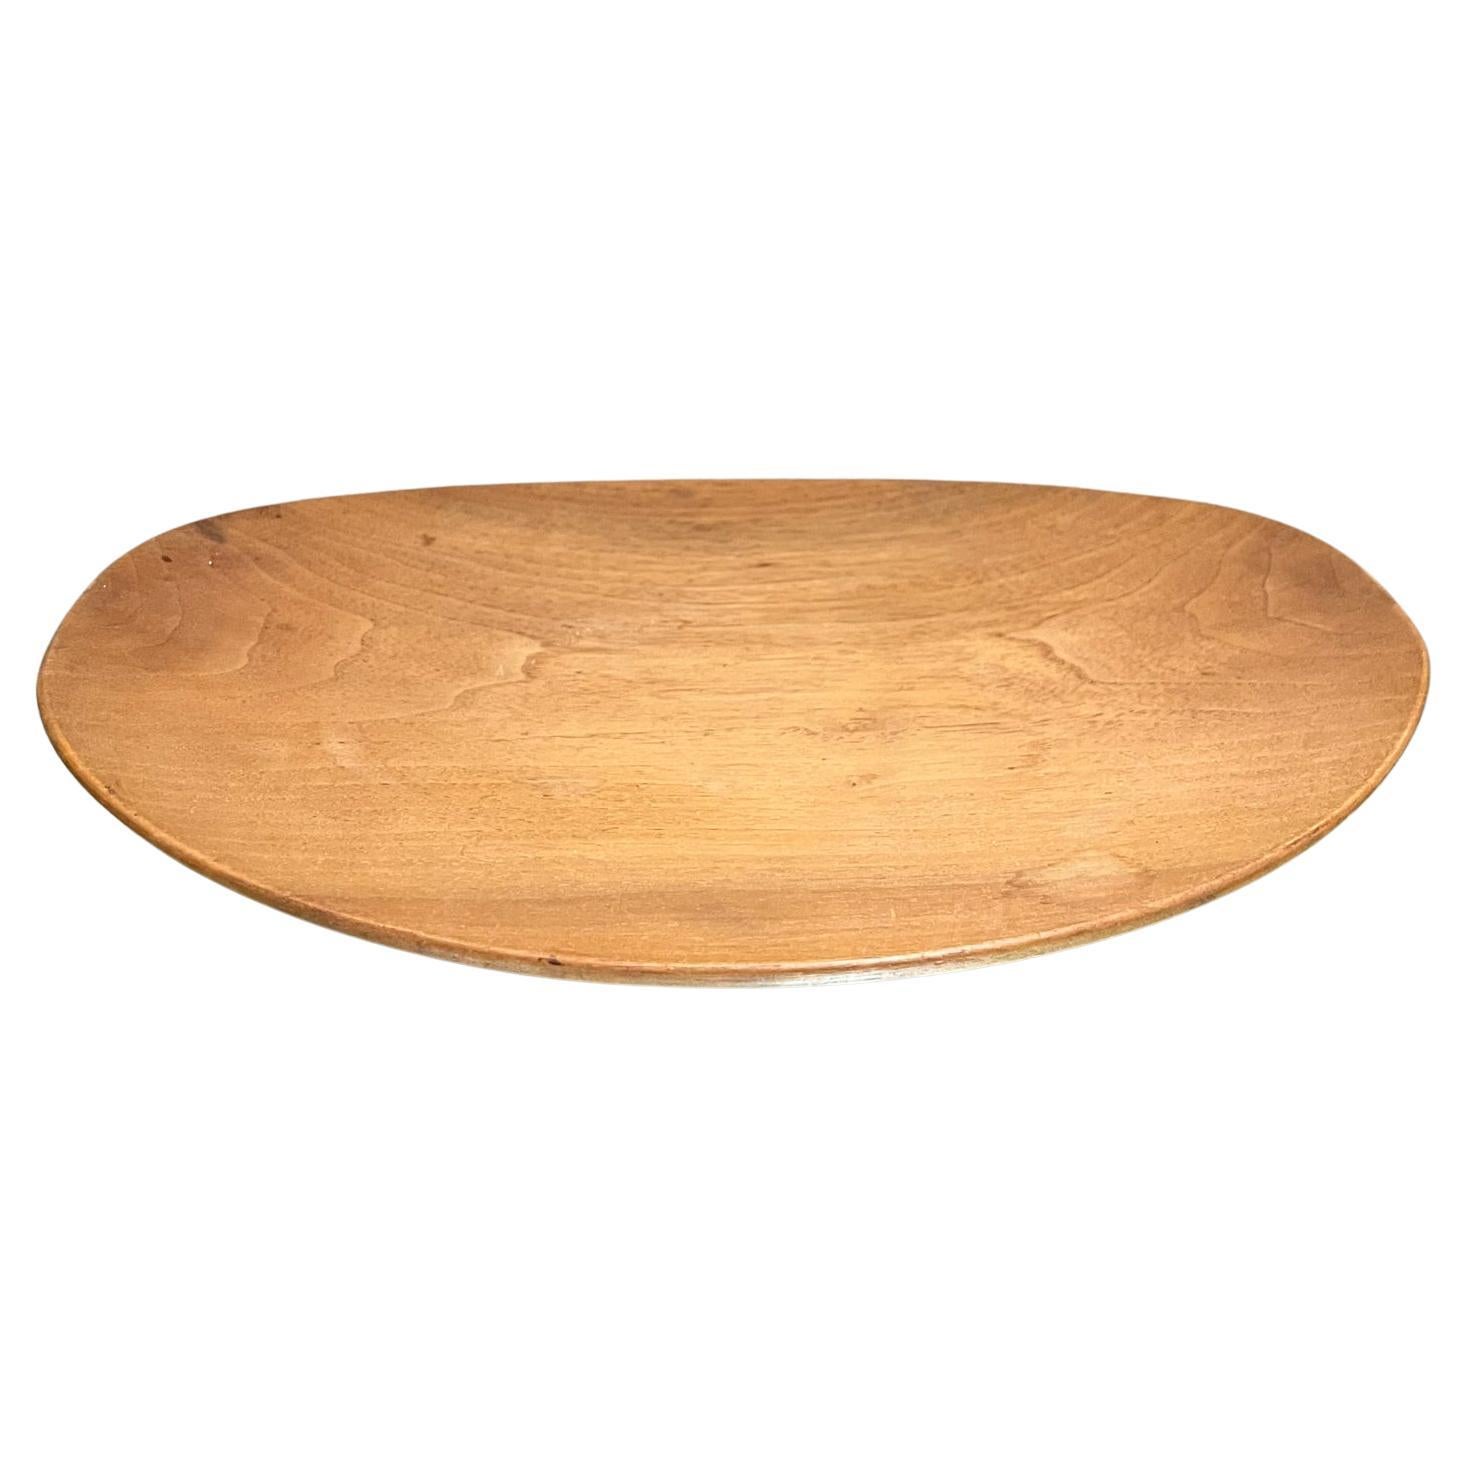 1960s Sculptural Oval Platter Solid Wood Plate Serving Tray